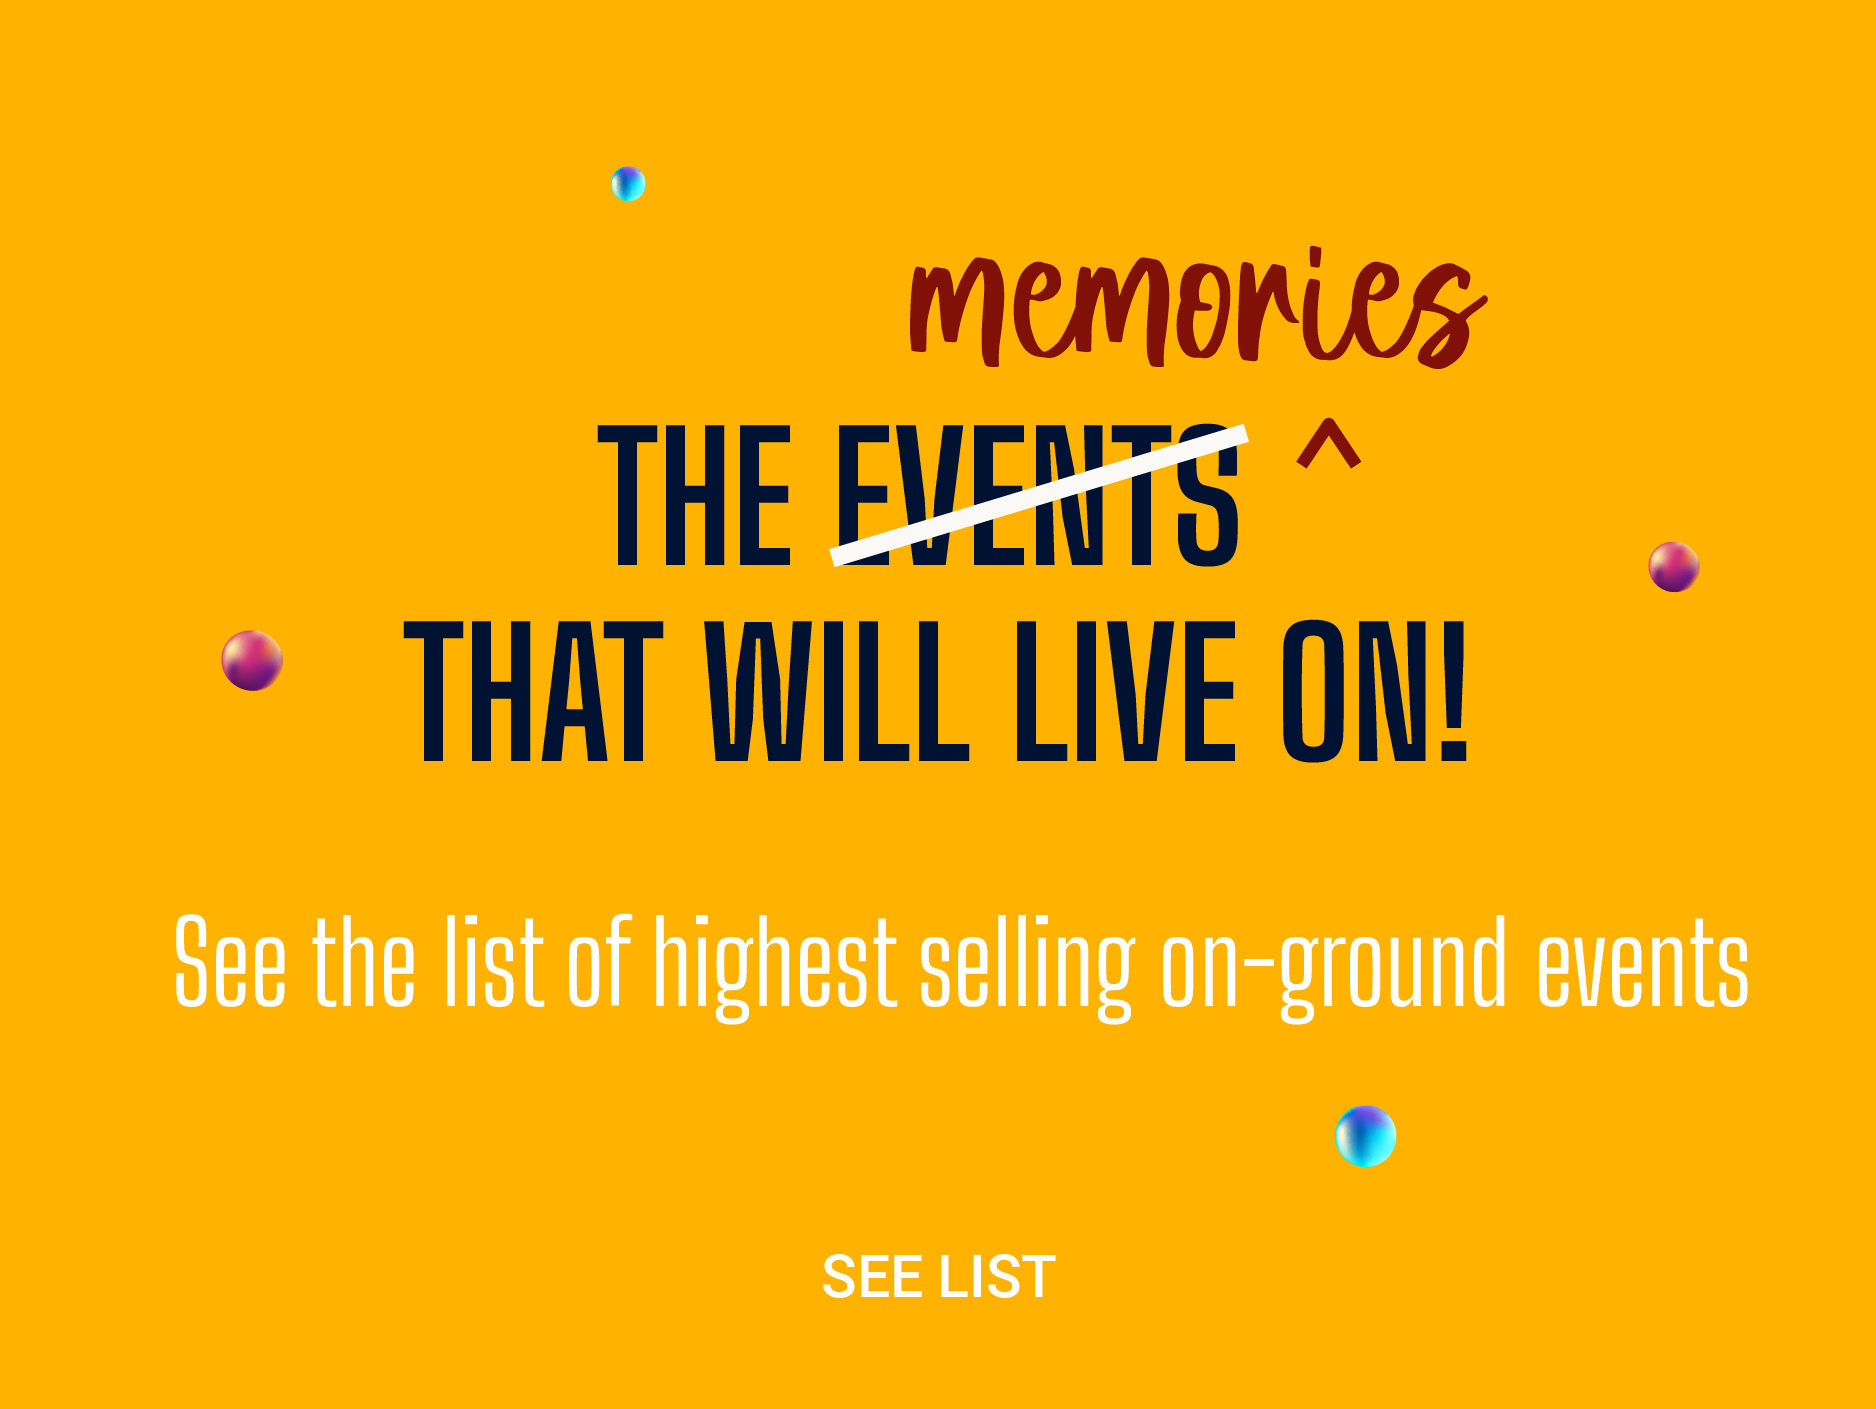 The events memories that will live on. See List of highest selling on-ground events